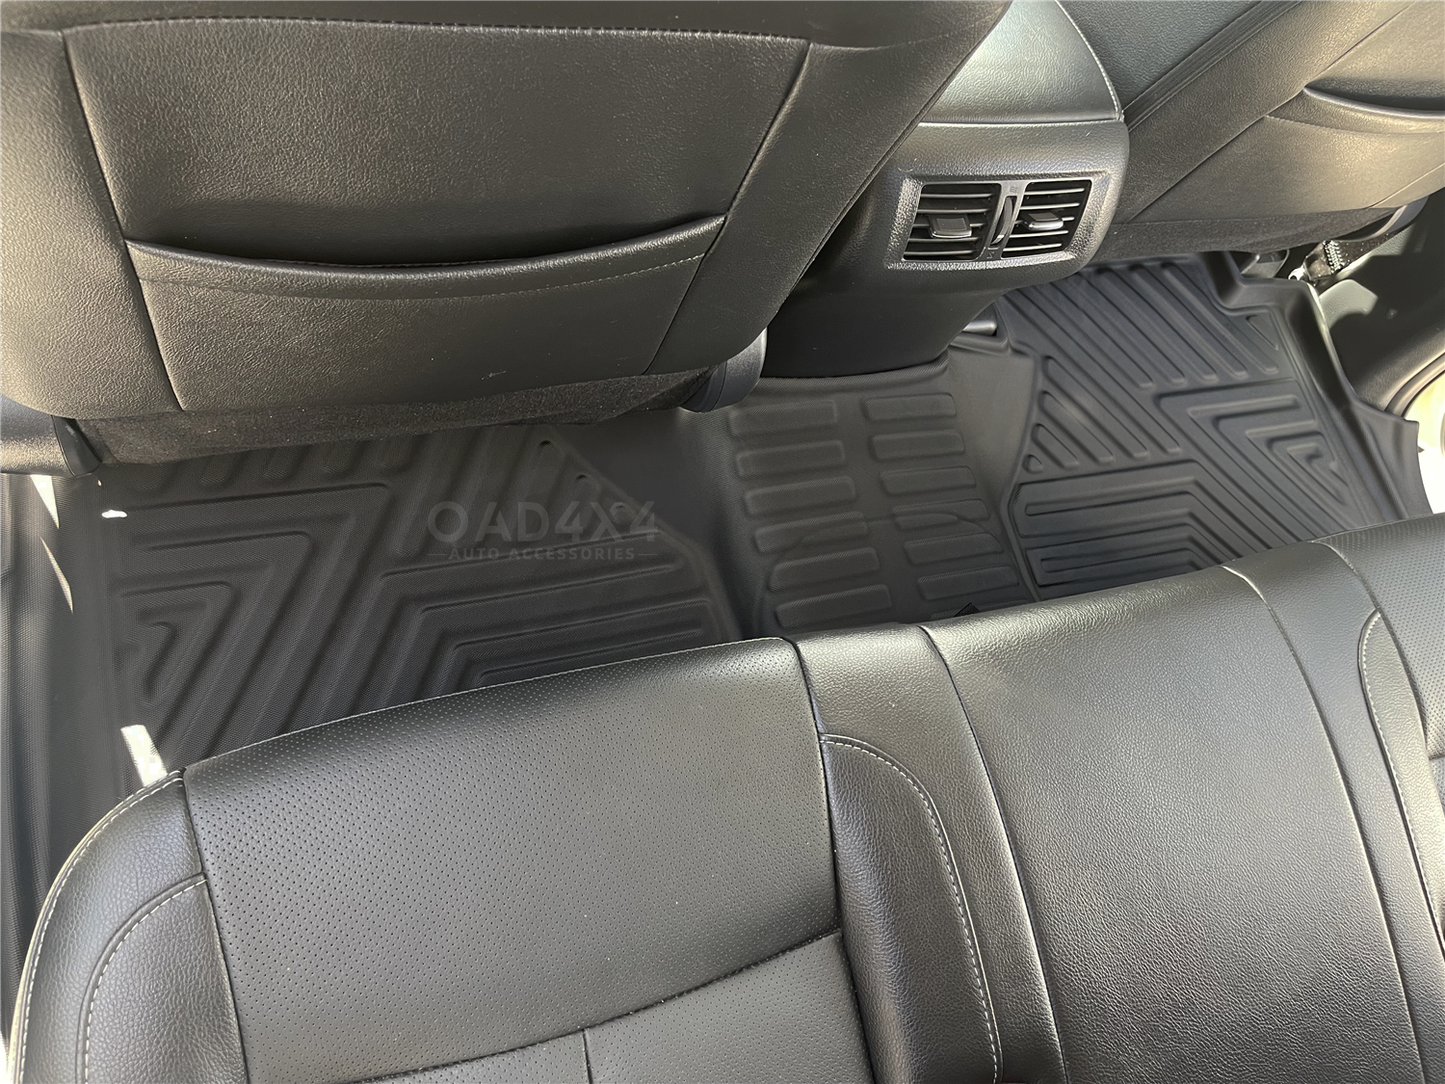 5D TPE Floor Mats & Black Door Sills Protector for Nissan Navara NP300 D23 Dual Cab 2015-Onwards Without Cup Holder Tailored Door Sill Covered Car Floor Mat Liner + Stainless Steel Scuff Plates